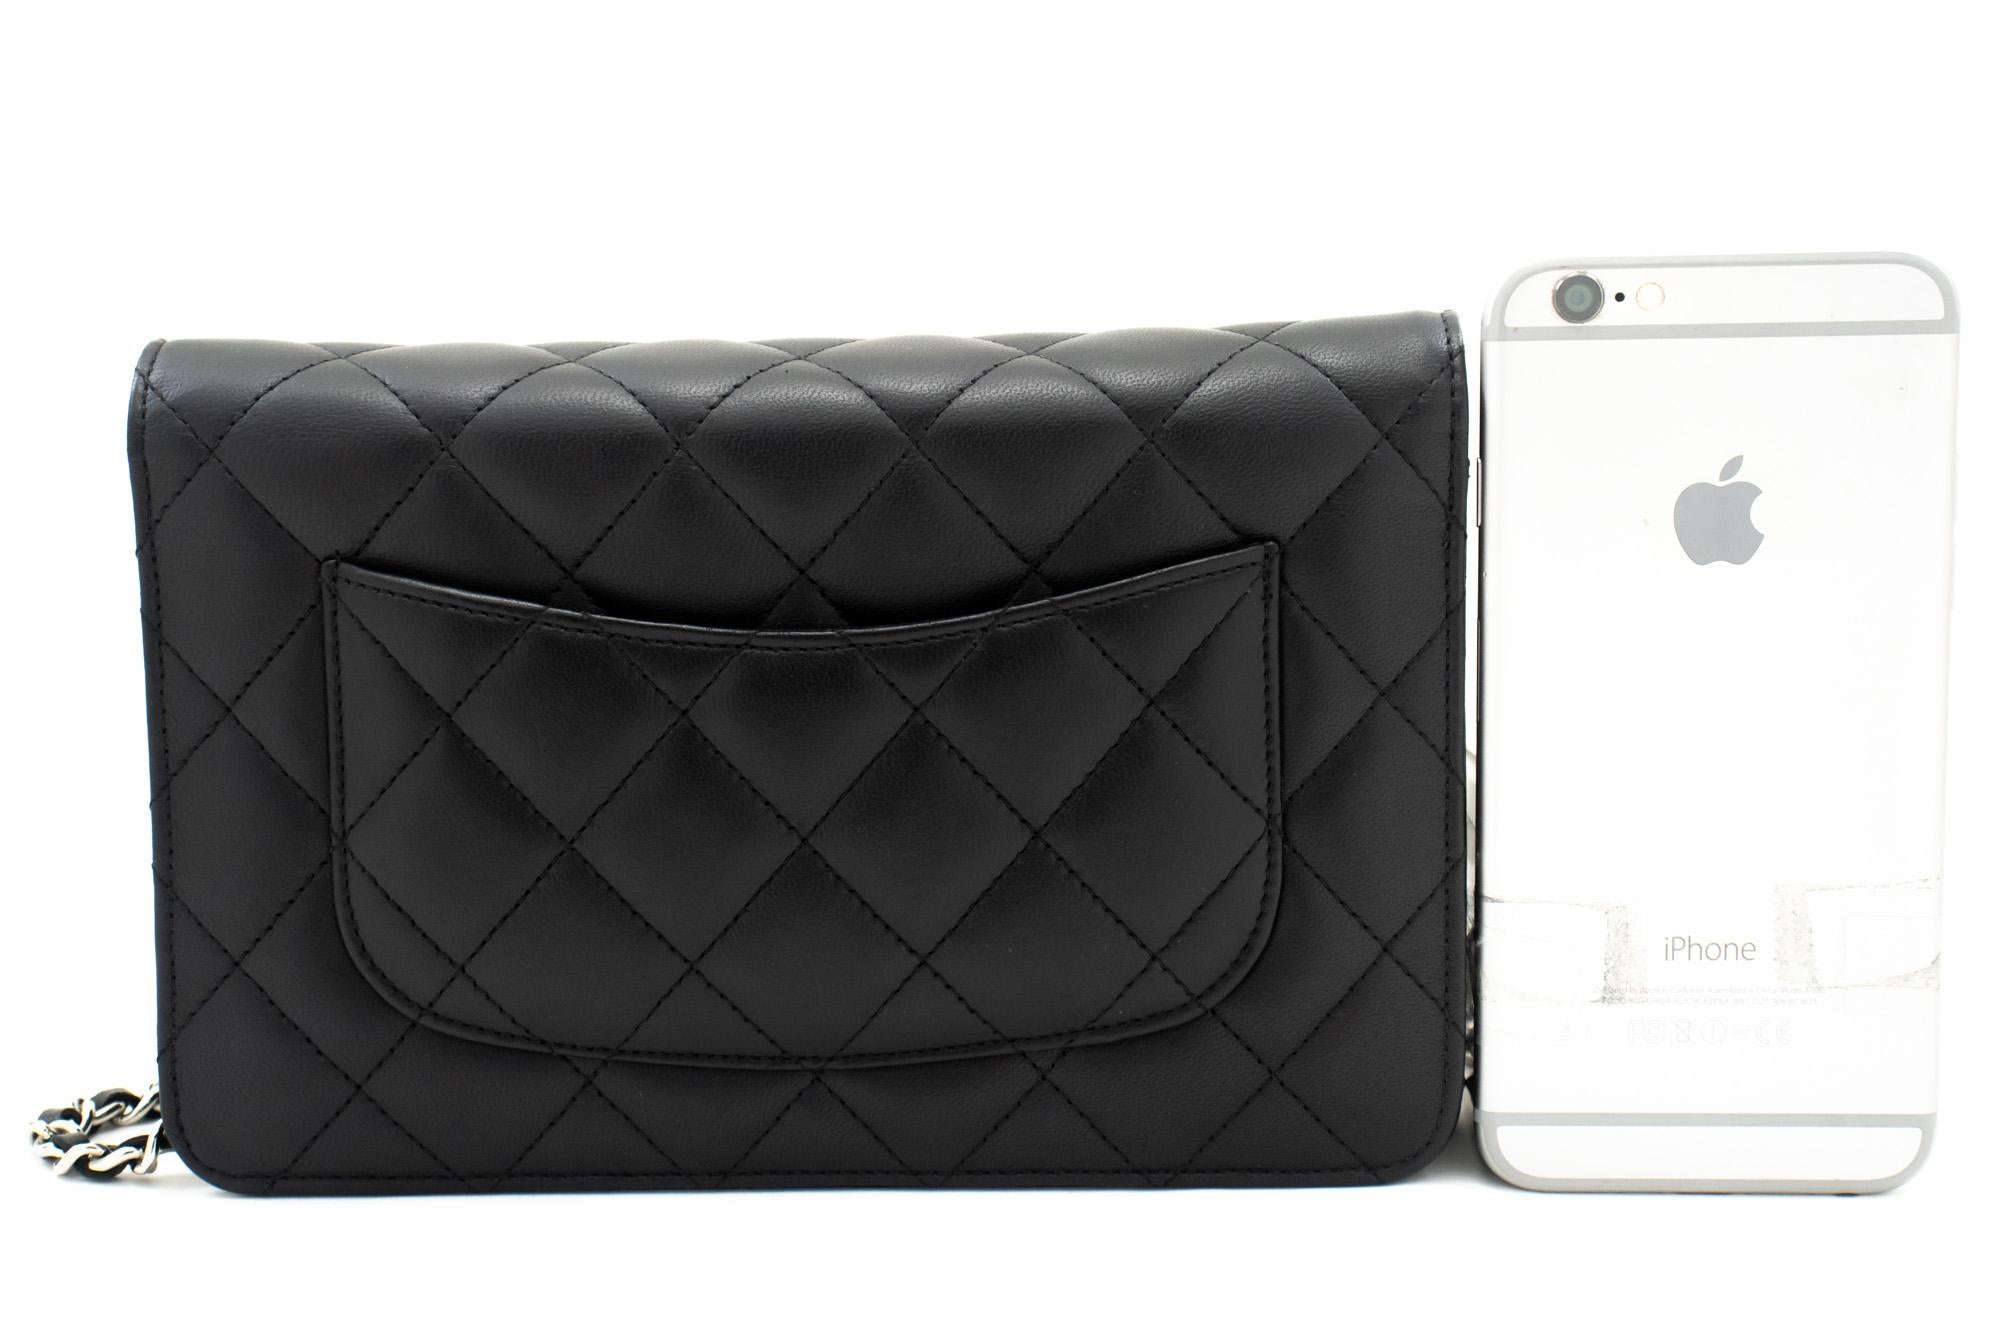 An authentic CHANEL Black Classic Wallet On Chain WOC Shoulder Bag made of black Lambskin. The color is Black. The outside material is Leather. The pattern is Solid. This item is Contemporary. The year of manufacture would be 2013.
Conditions &